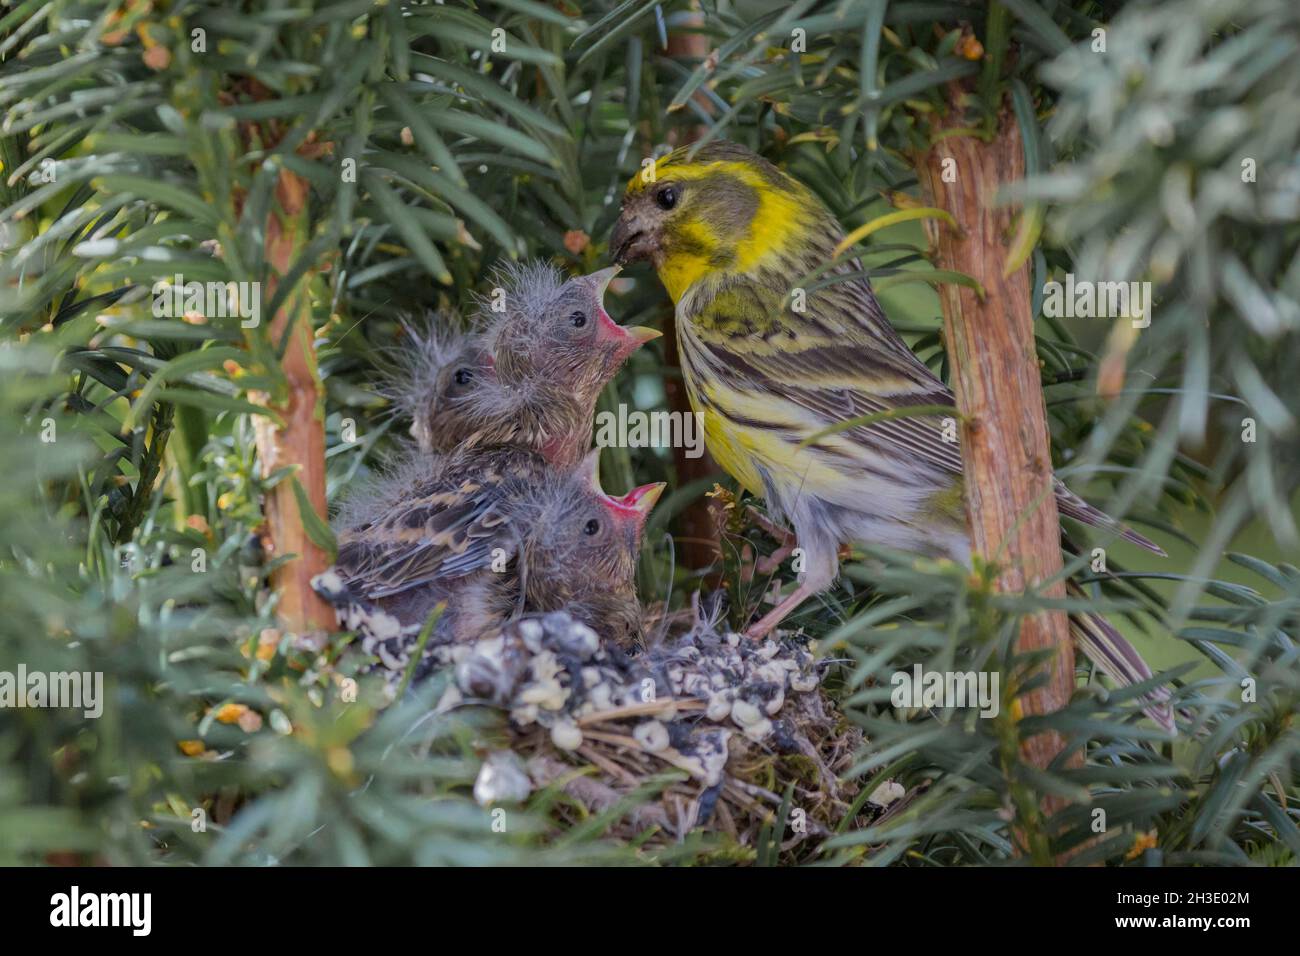 European serin (Serinus serinus), Male feeds the chicks in the nest, regurgitating seeds from its craw, Germany Stock Photo